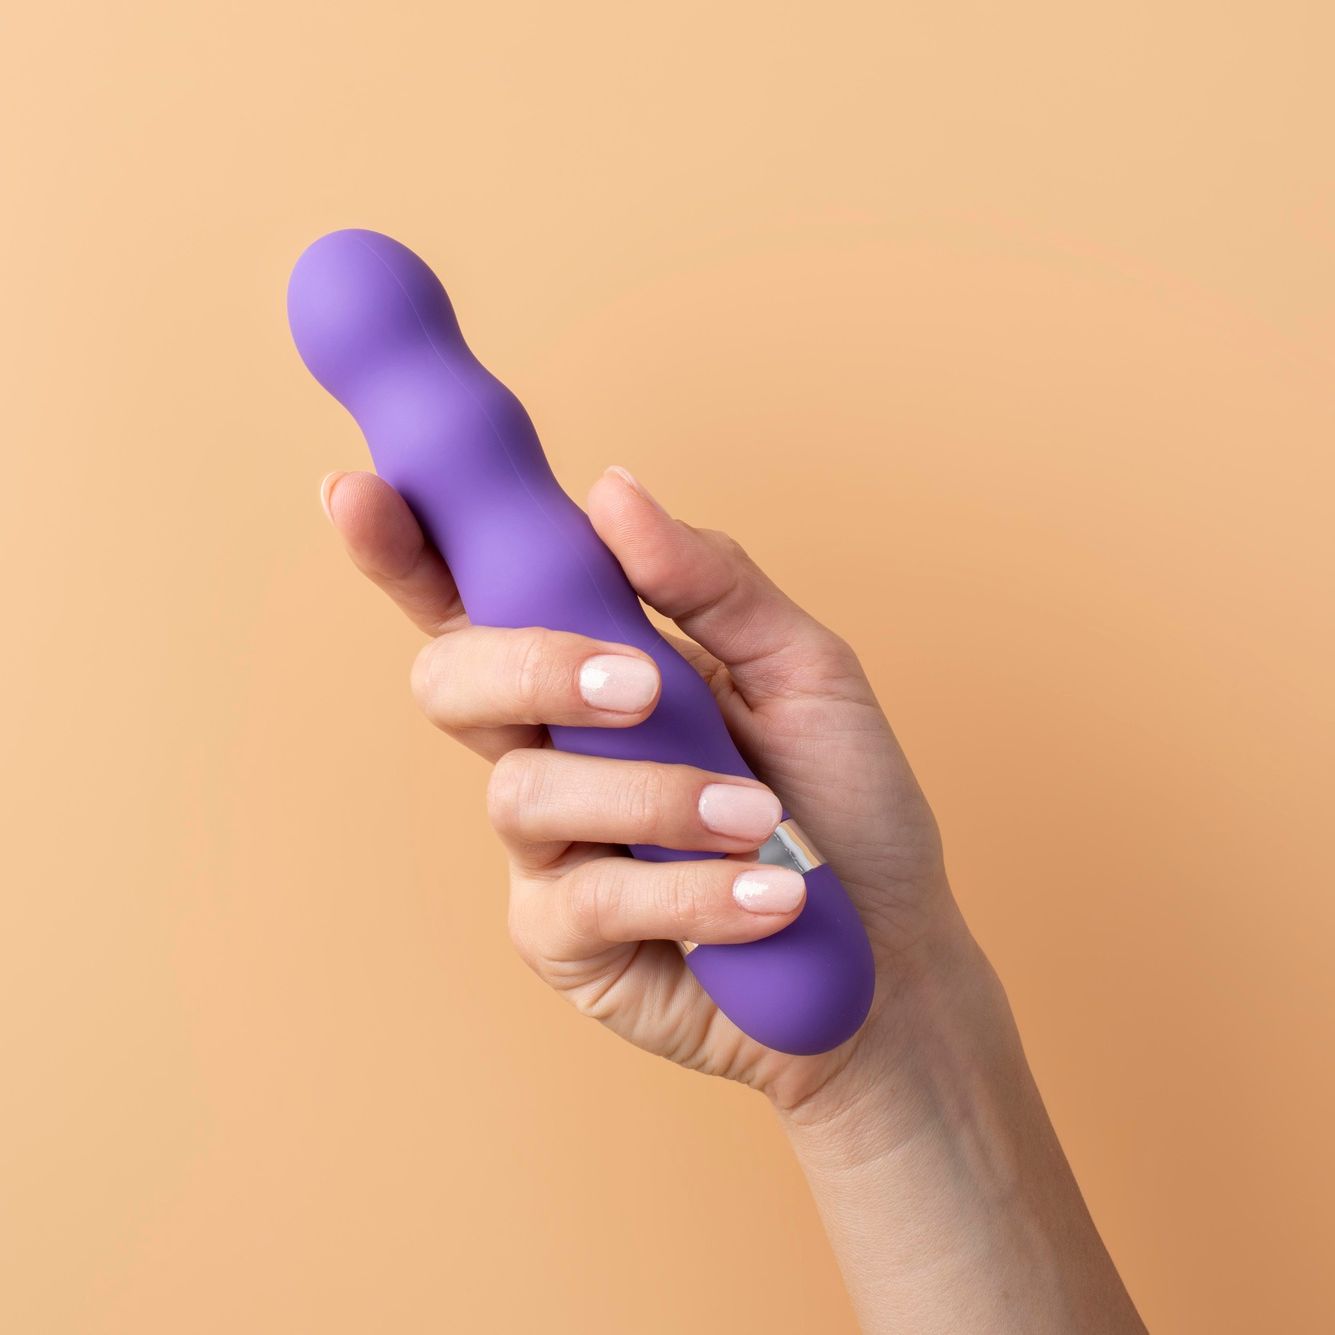 Purple vibrating Dildo in a woman's hand with pink polished classy nails